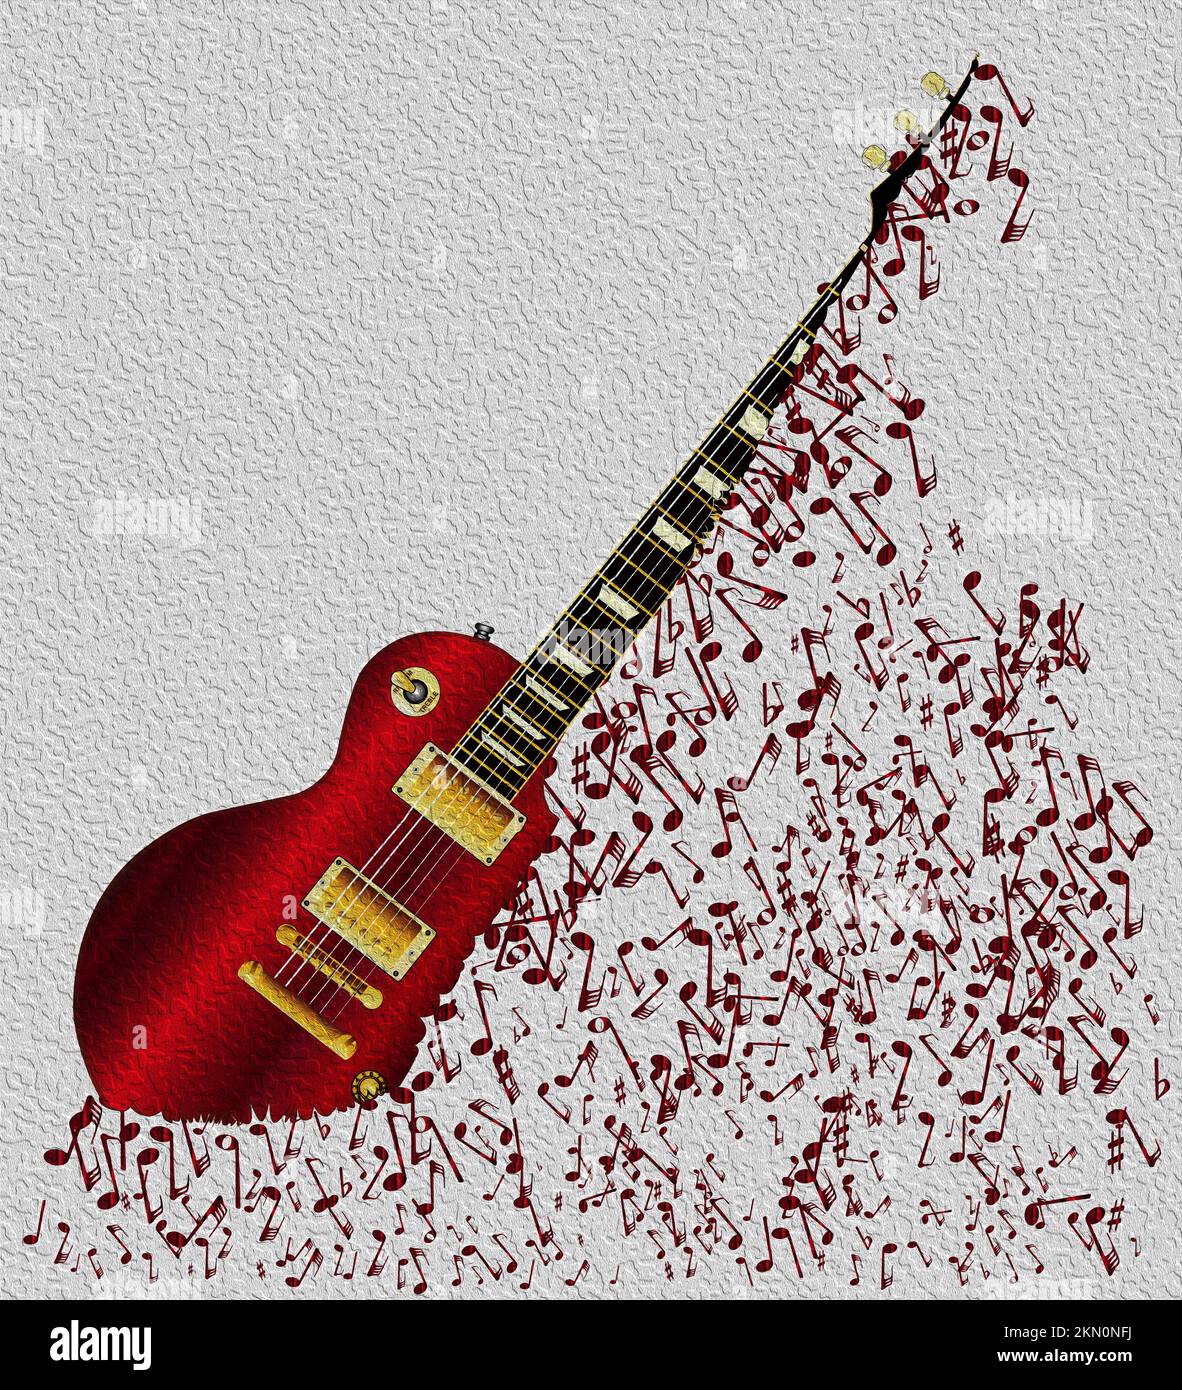 The definitive rock and roll guitar disintigrating into a hail of red musical notes on canvas Stock Photo